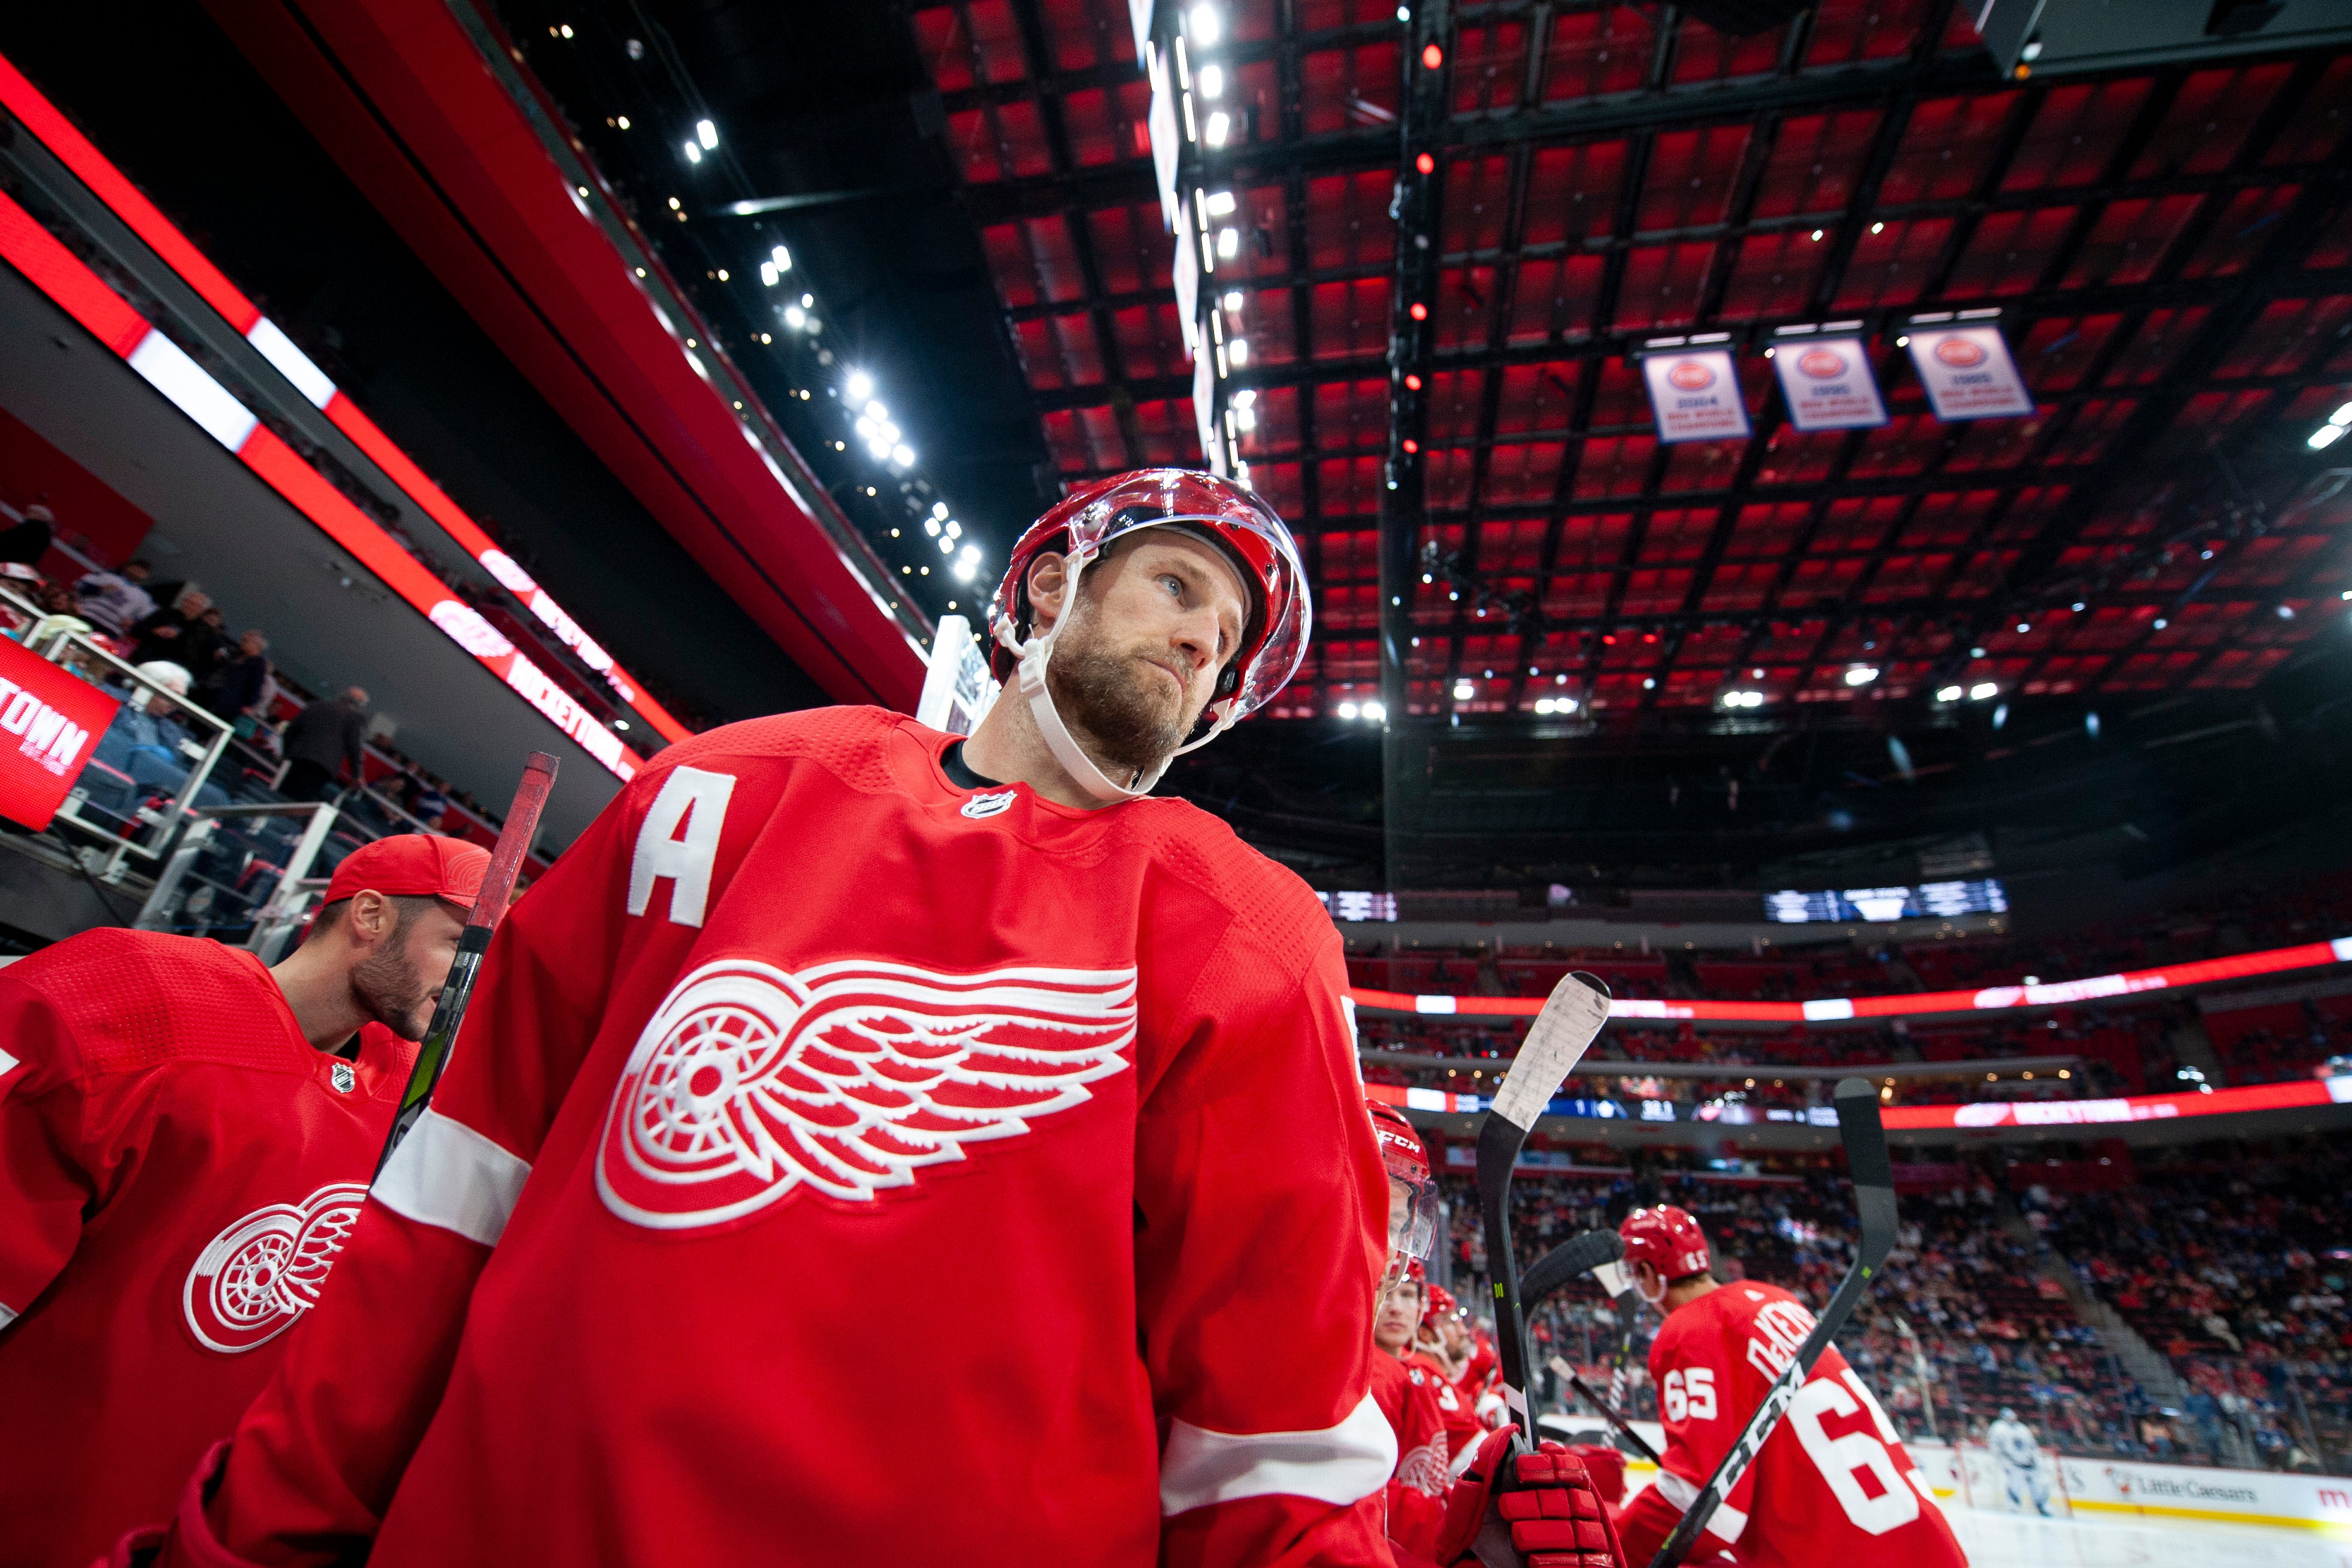 Detroit defenseman Niklas Kronwall walks out of the tunnel for the start of a game against the Toronto Maple Leafs at Little Caesars Arena on Oct. 11, 2018.